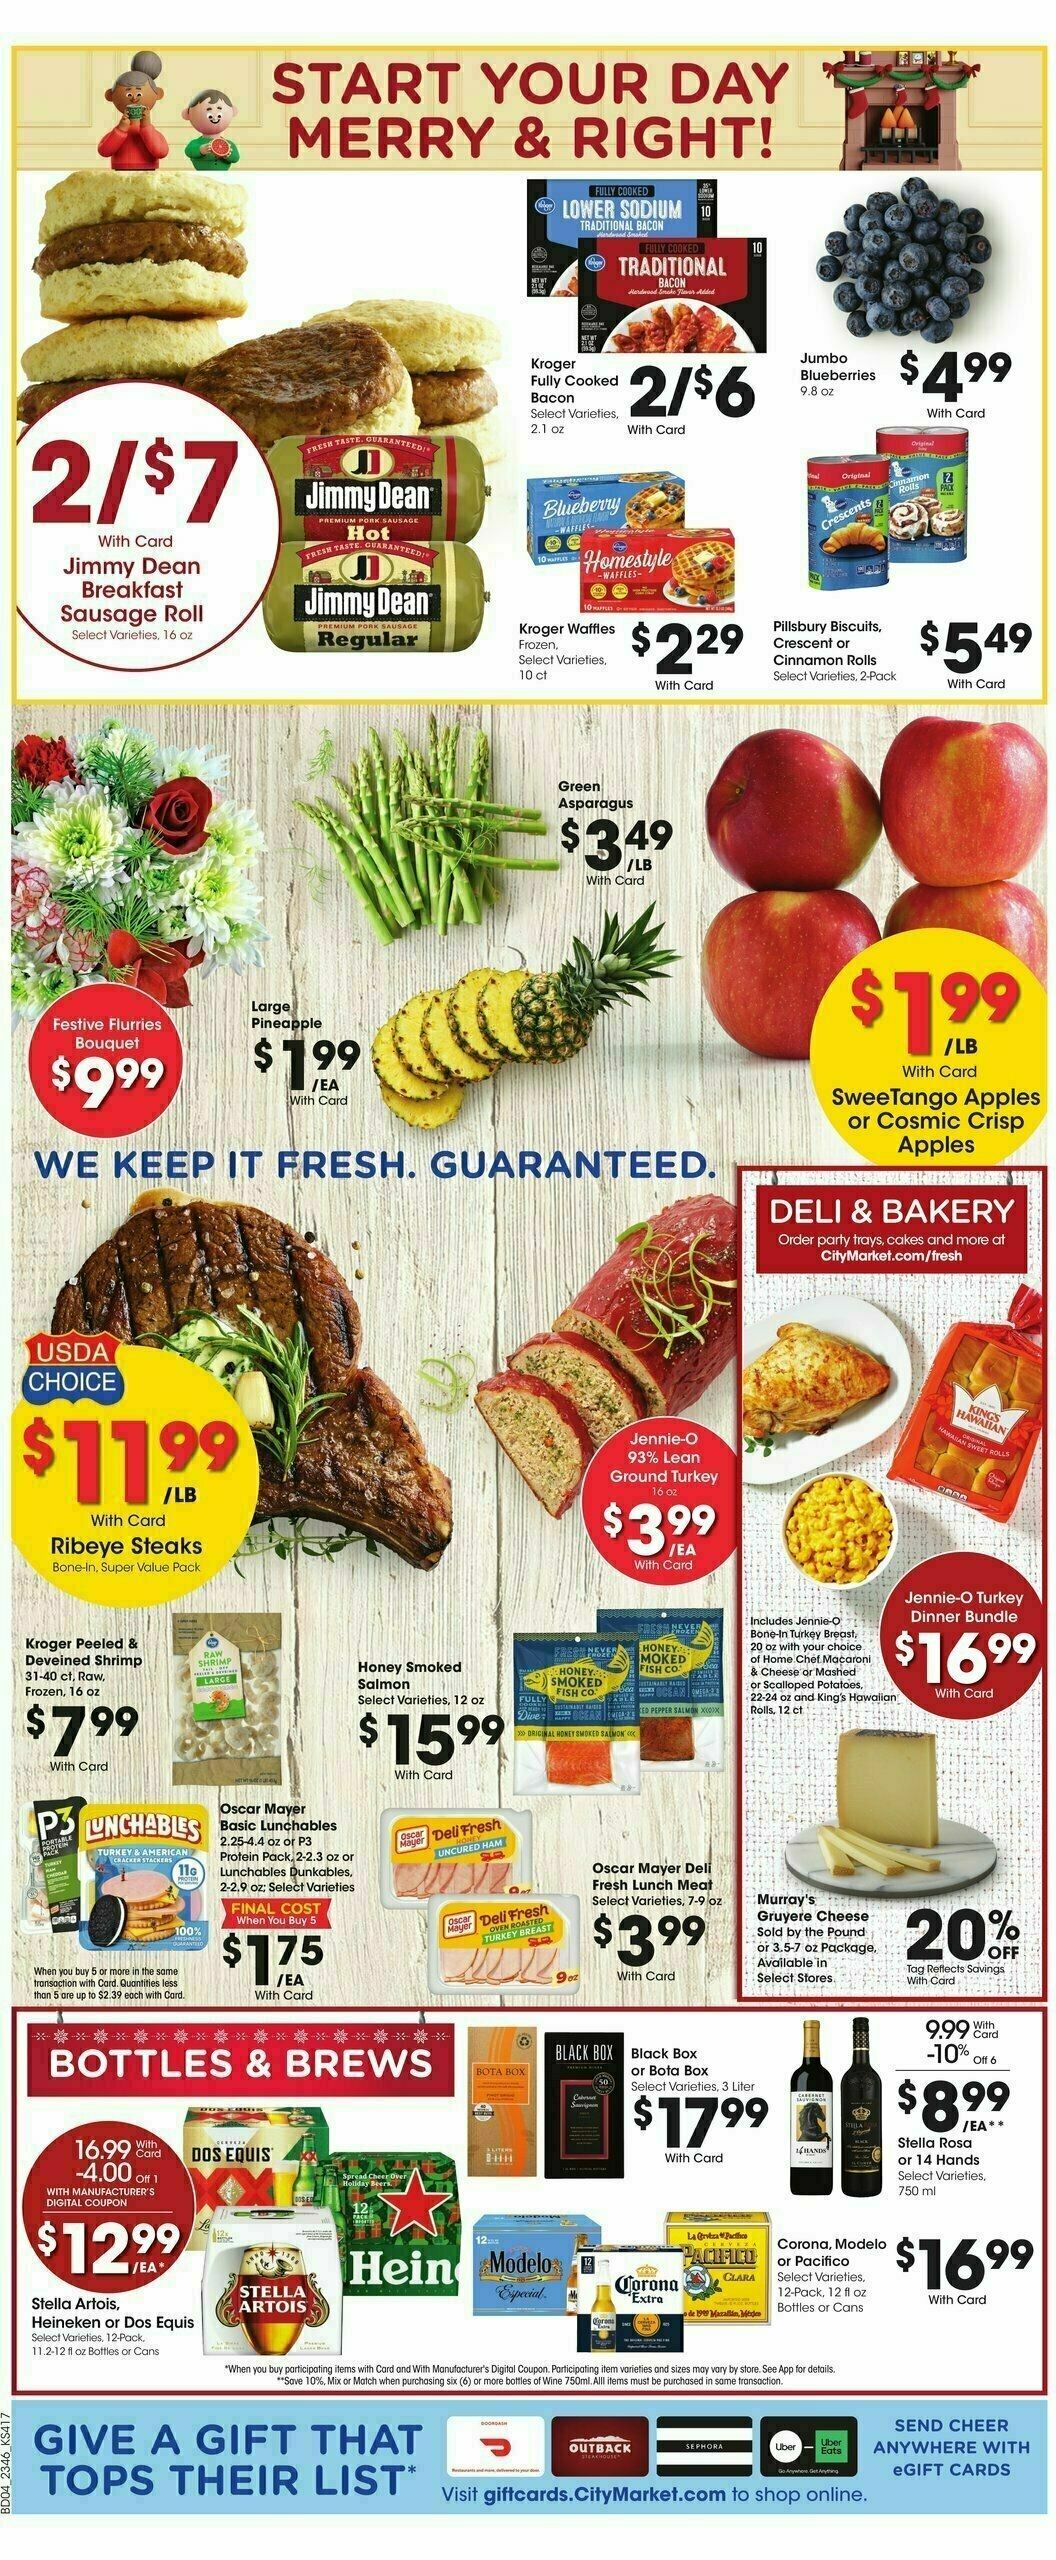 City Market Weekly Ad from December 13